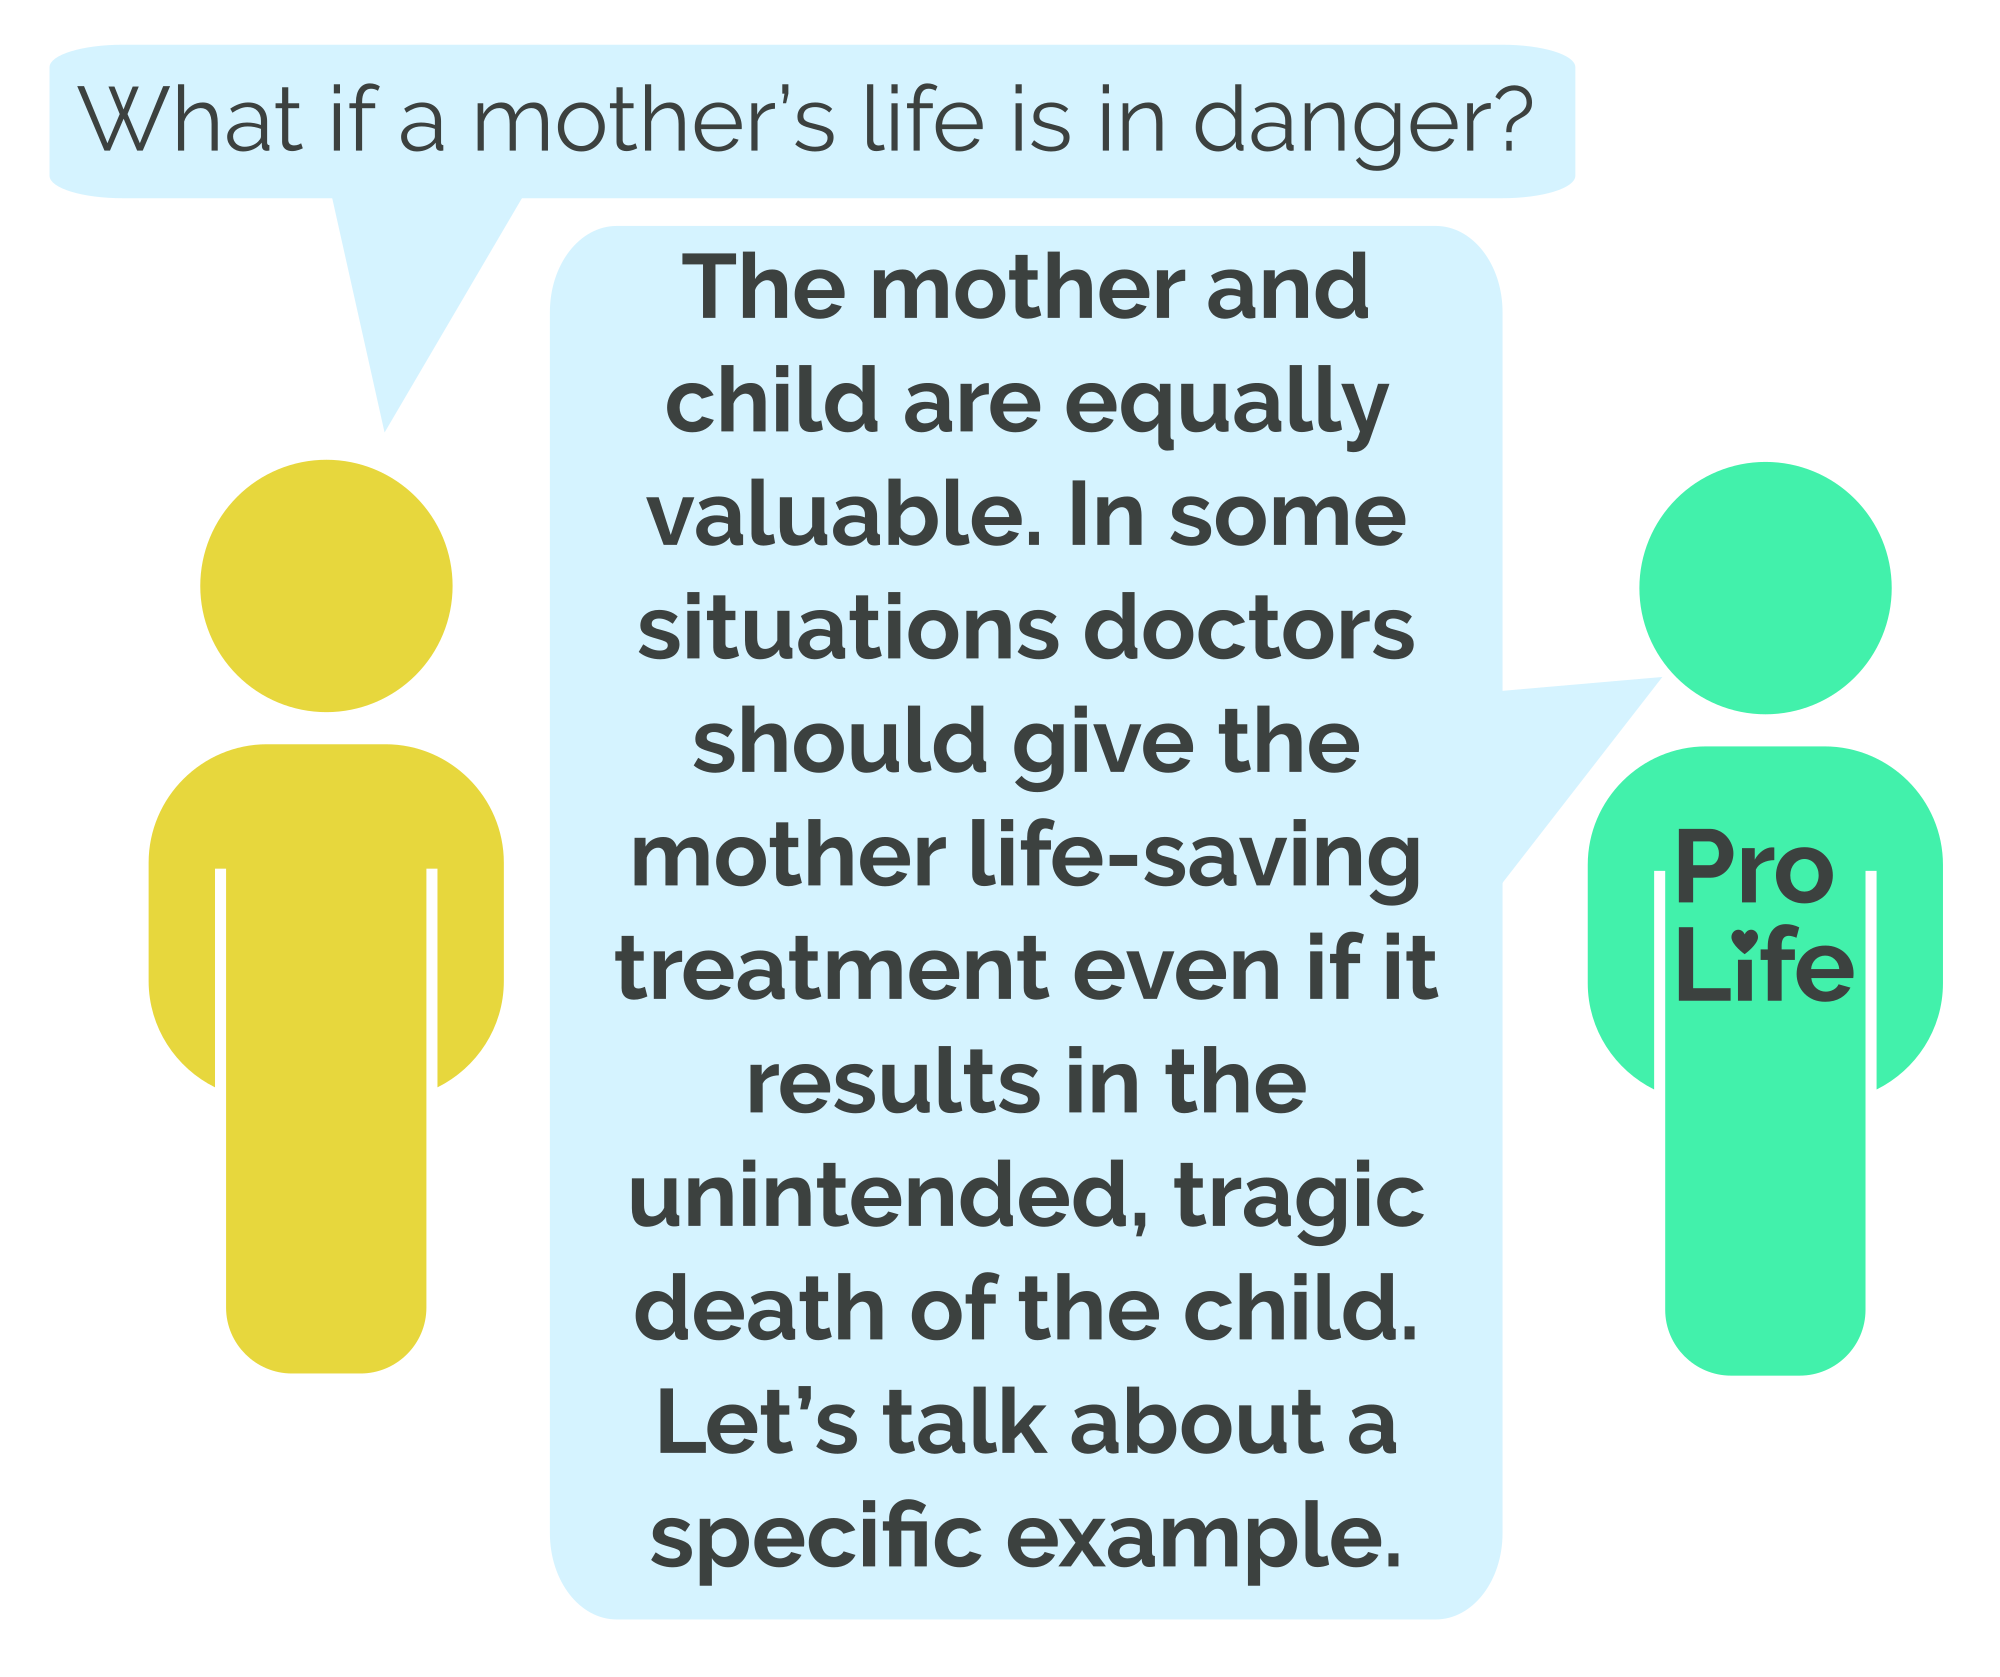 Person 1: What if a mother’s life is in danger? Person 2 (our hero): The mother and child are equally valuable. In some situations doctors should give the mother life-saving treatment even if it results in the unintended, tragic death of the child. Let’s talk about a specific example.